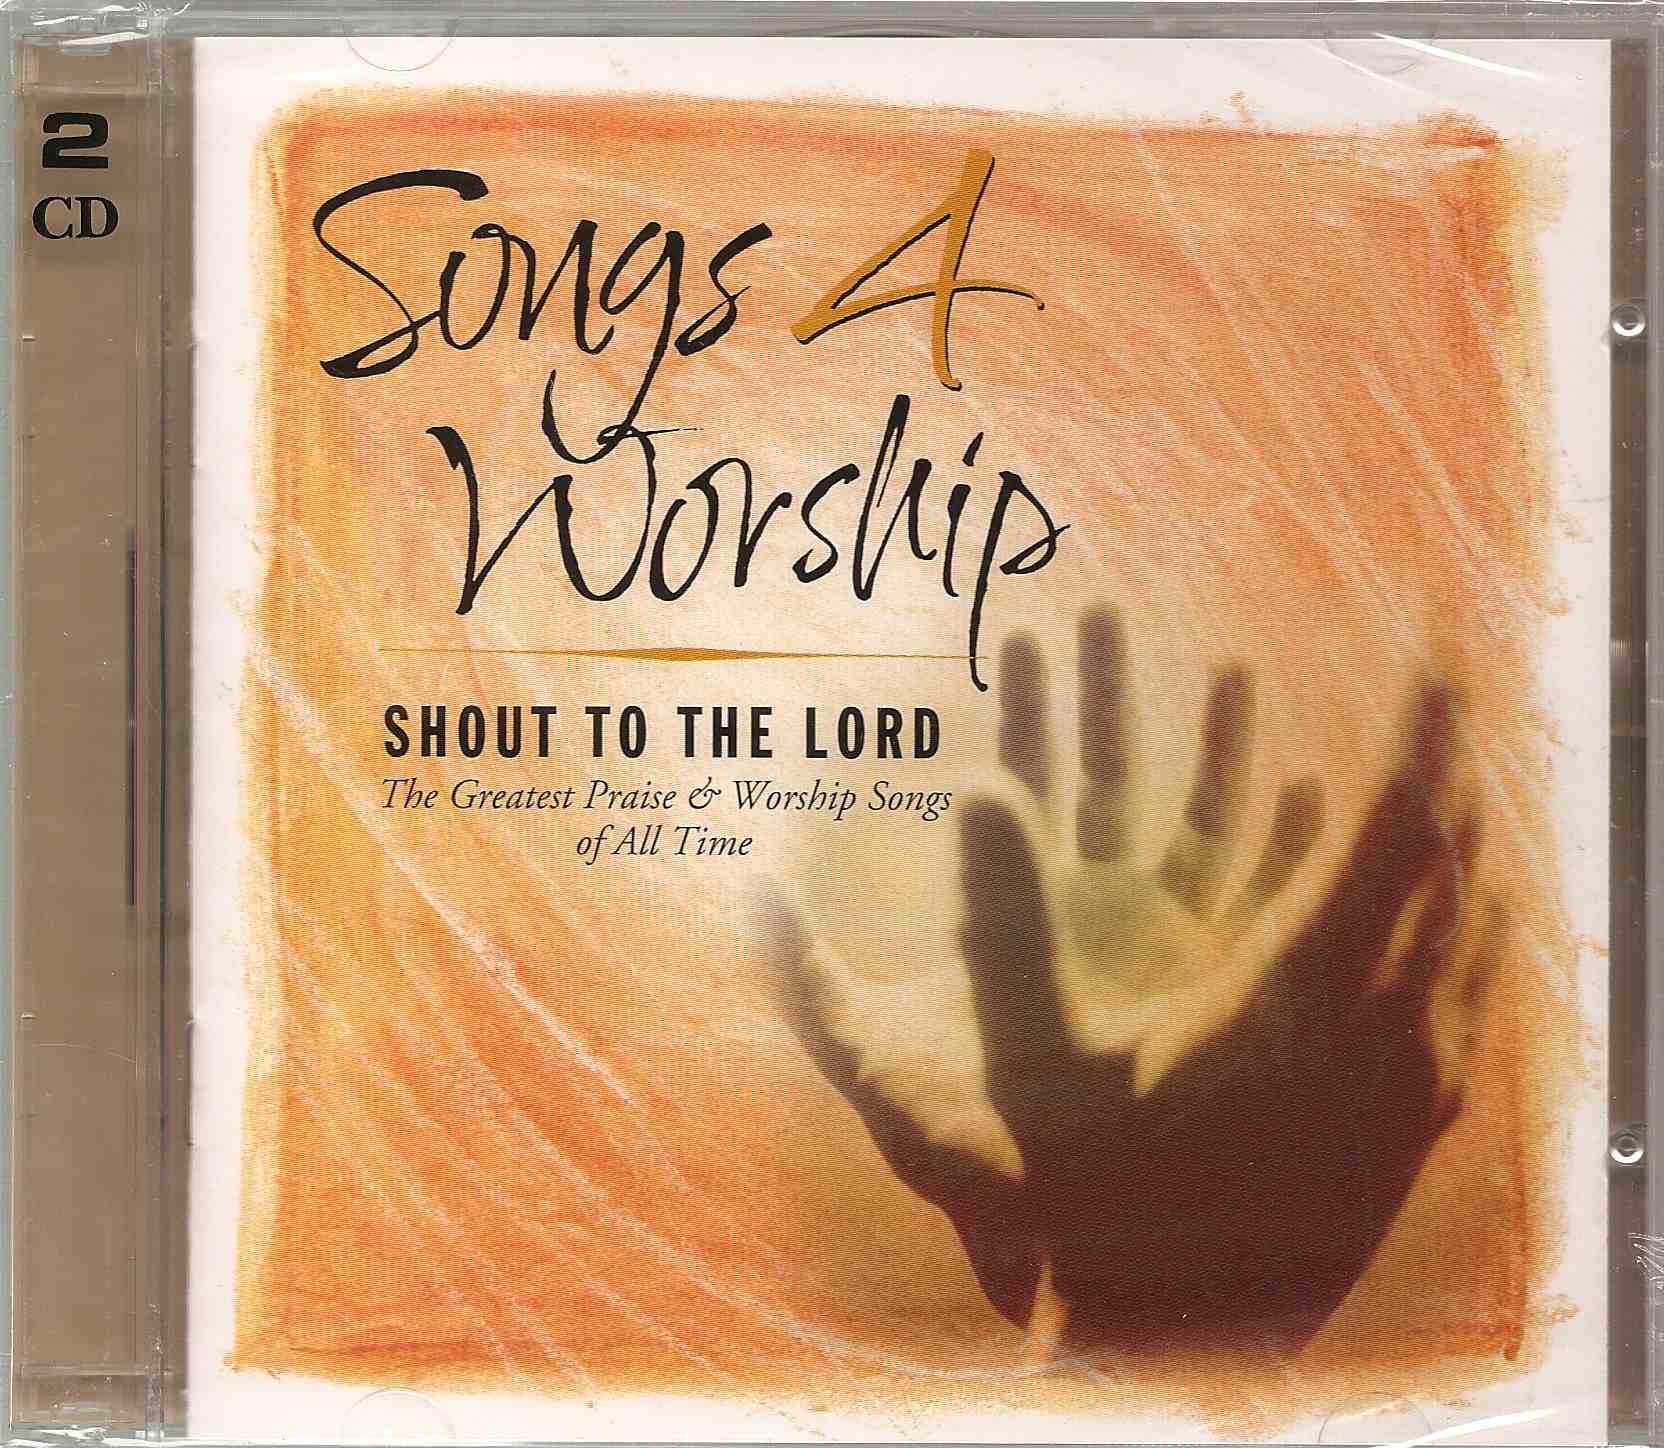 Songs 4 Worshp- Shout to the Lord - Click Image to Close